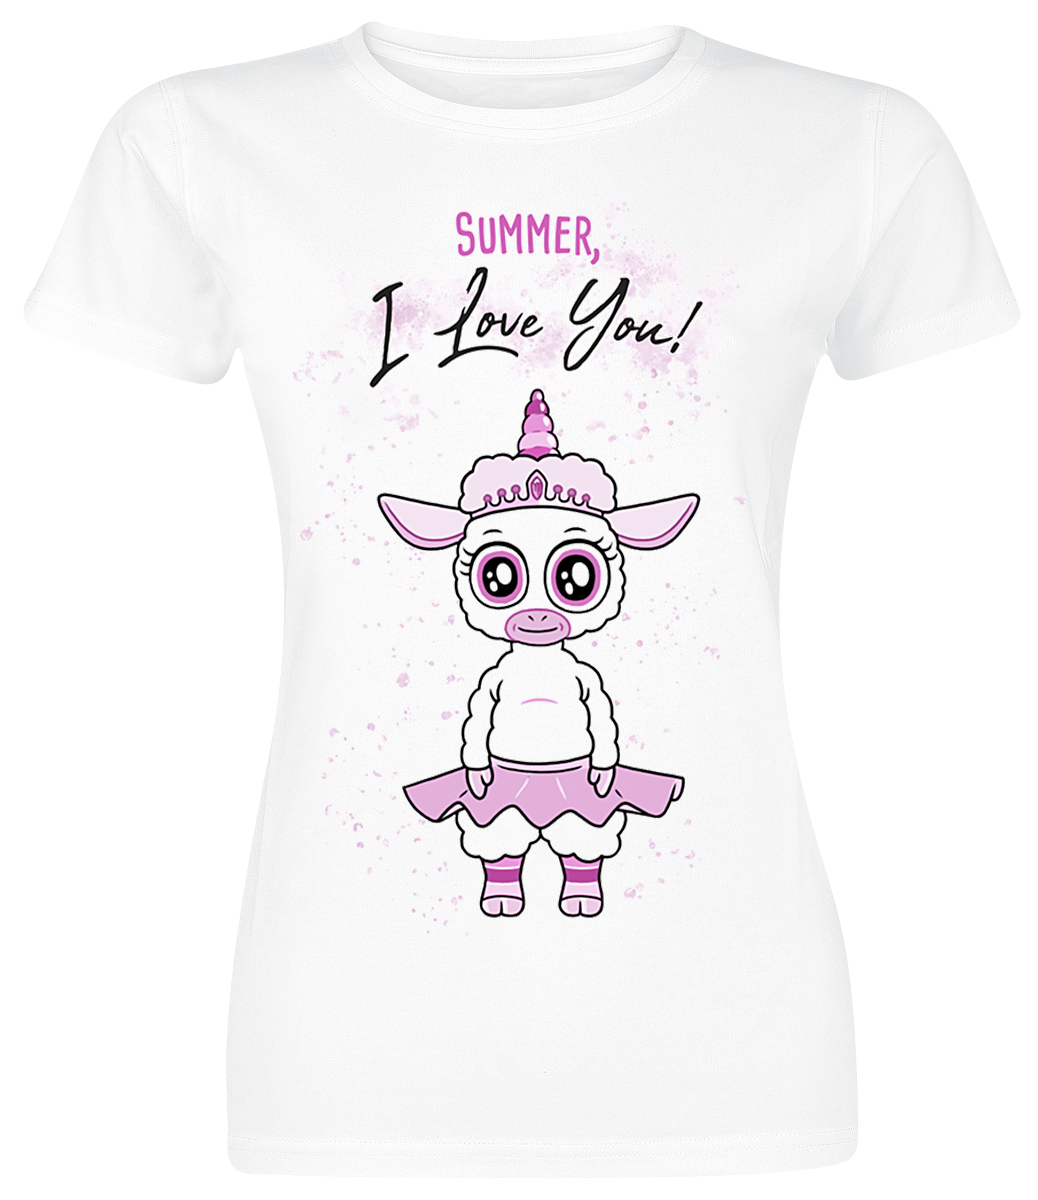 Rick And Morty - Tinkles - Summer I Love You - Girls shirt - white image